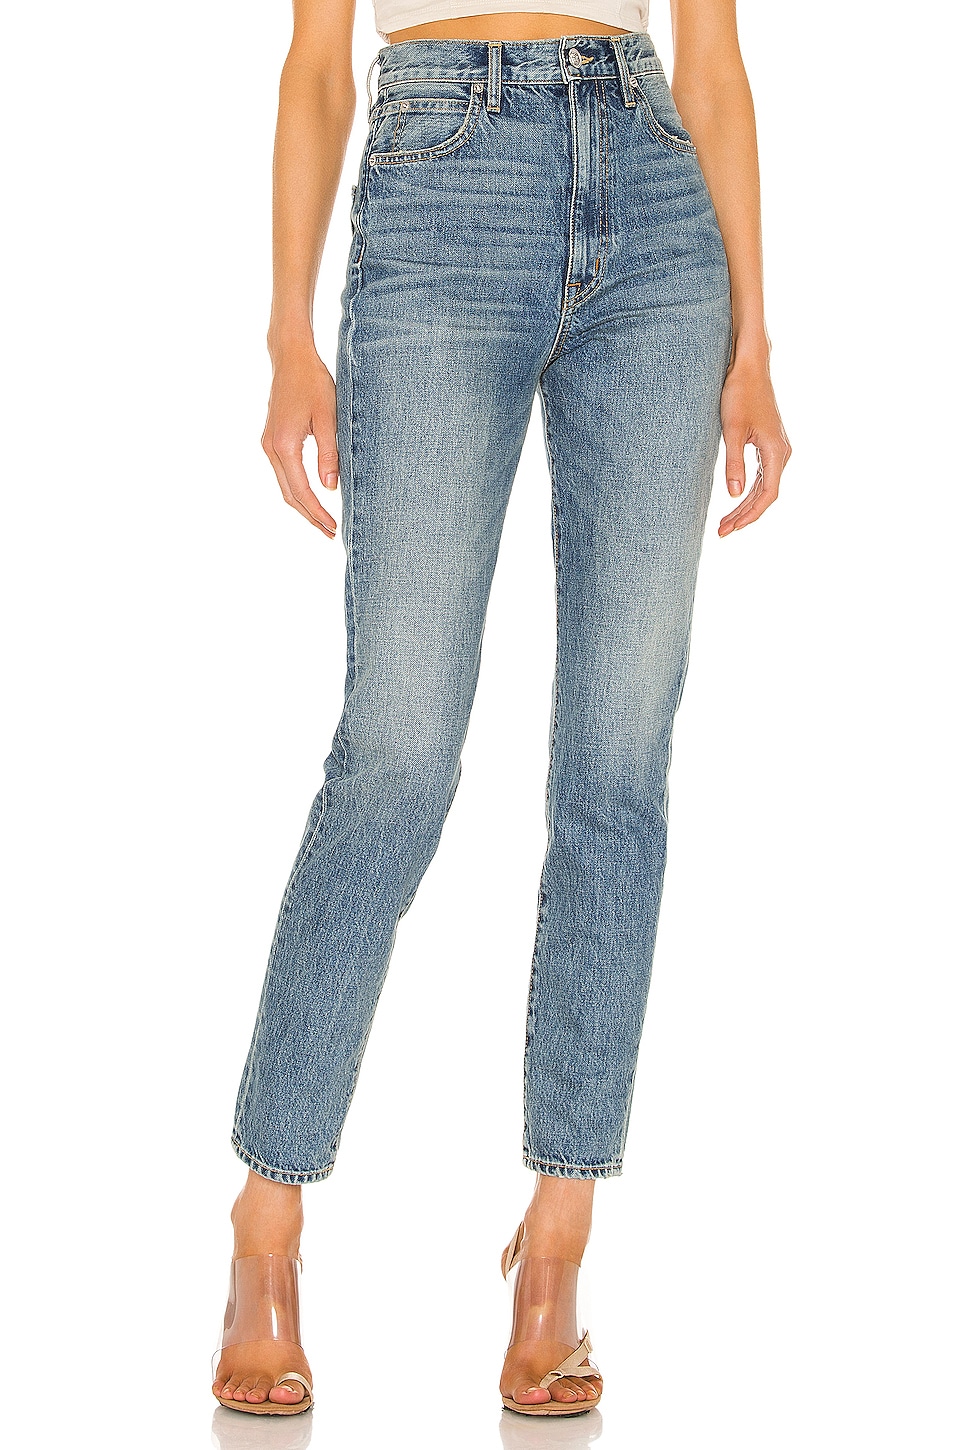 Beatnik High Rise Slim Jean in Blue. Revolve Women Clothing Jeans High Waisted Jeans 